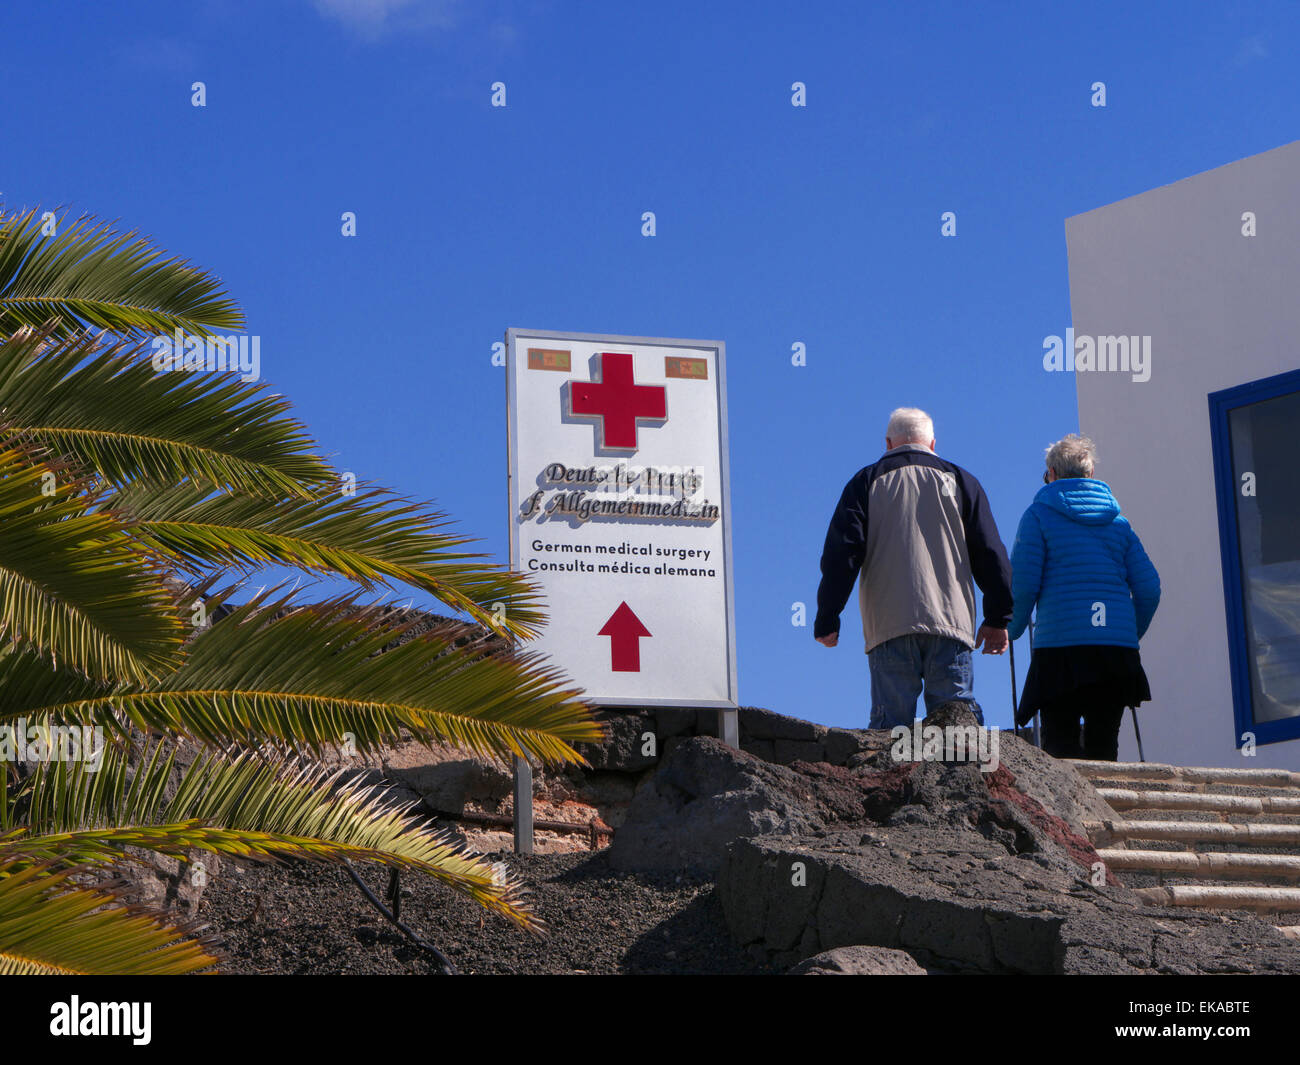 Medical treatment for illness abroad Elderly couple and sign for local private medical clinic care in Canary Islands Spain EU with blue sky & palms Stock Photo